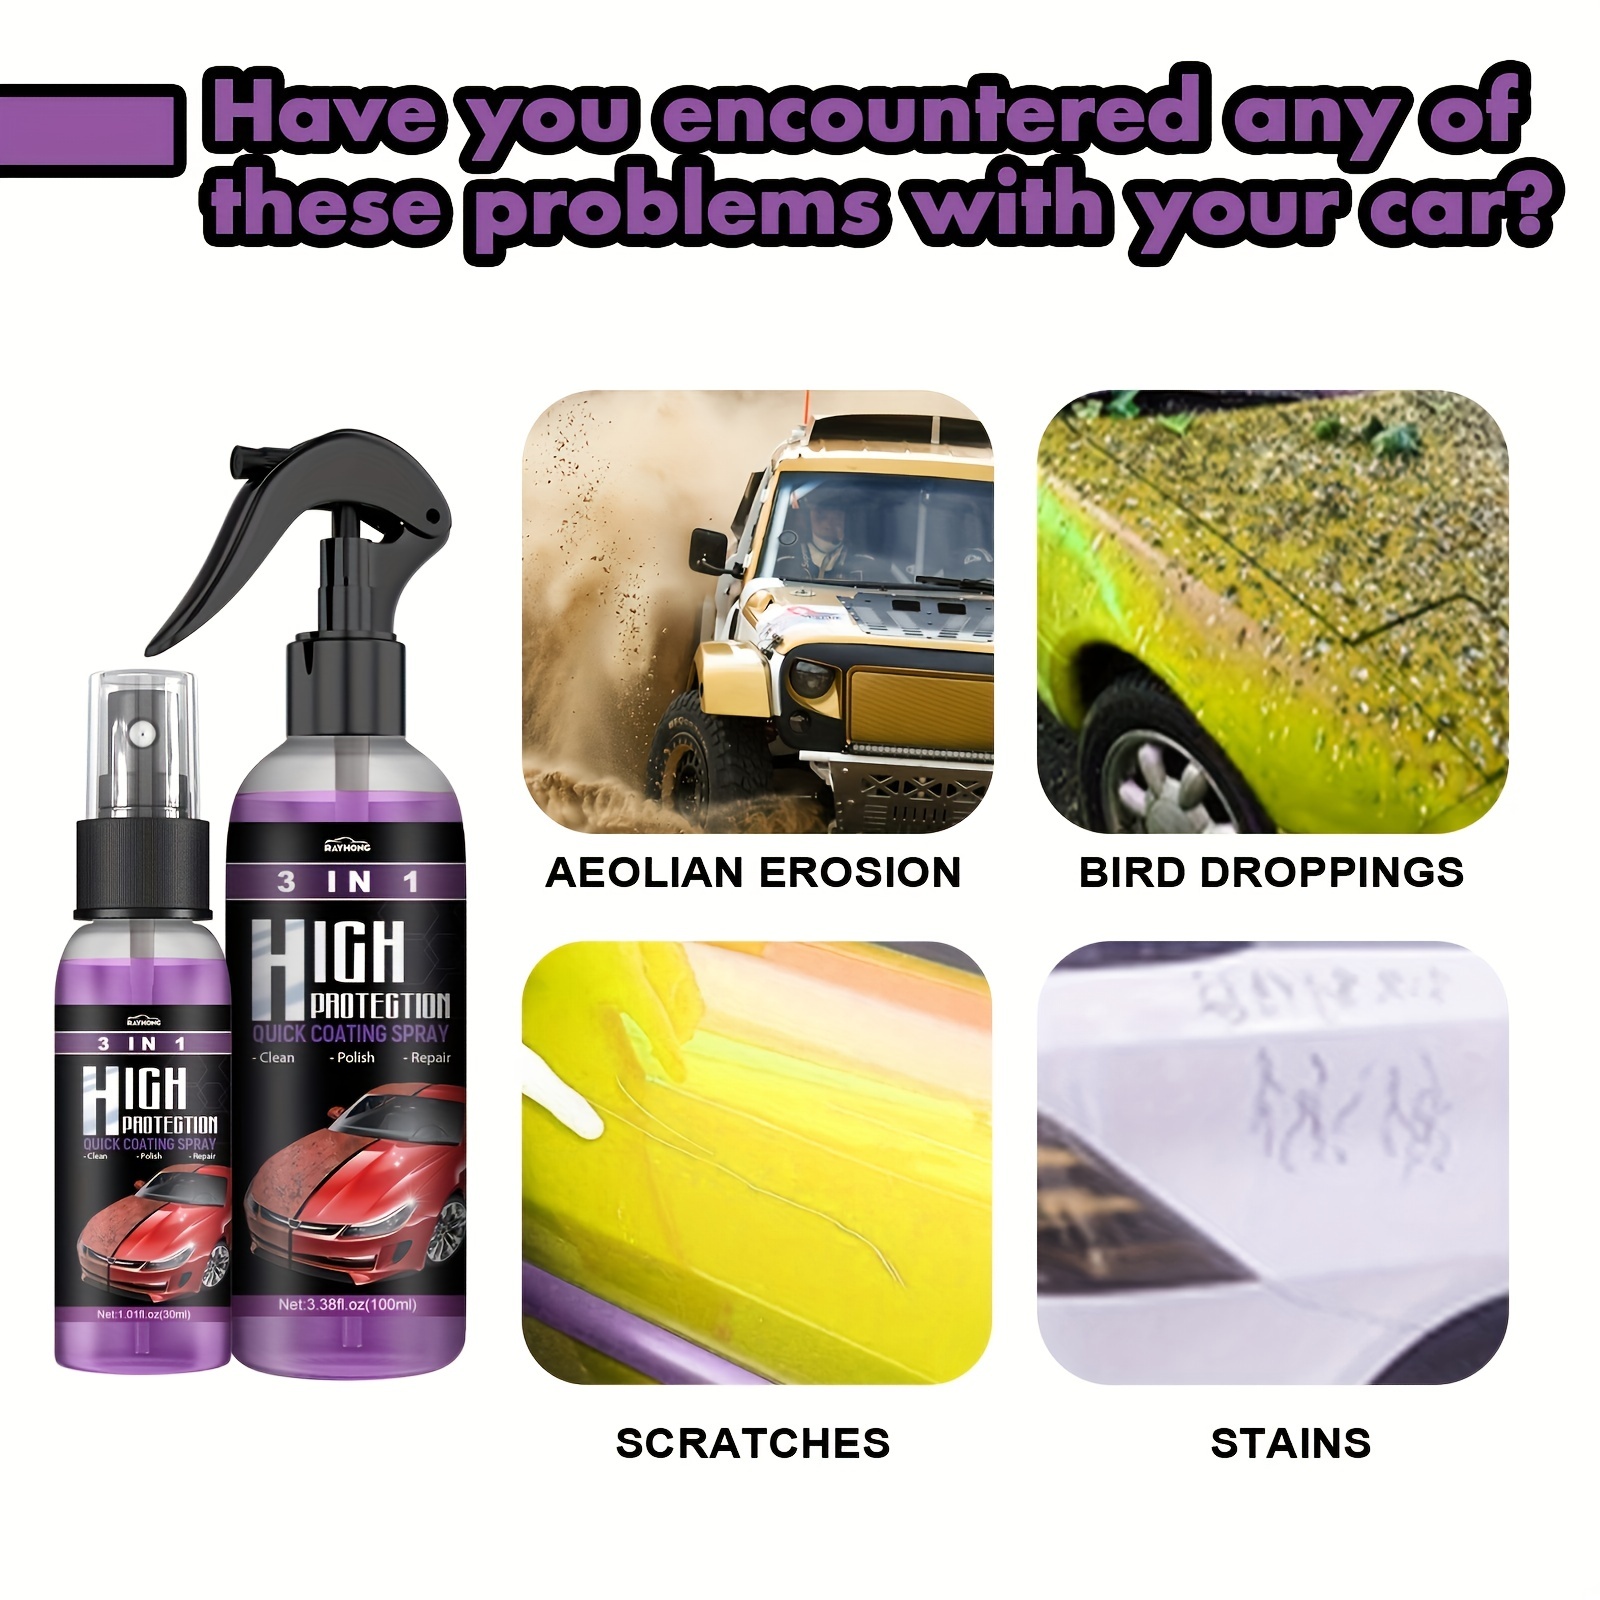 3 in 1 High Protection Quick Car Coating Spray [Video] [Video] in